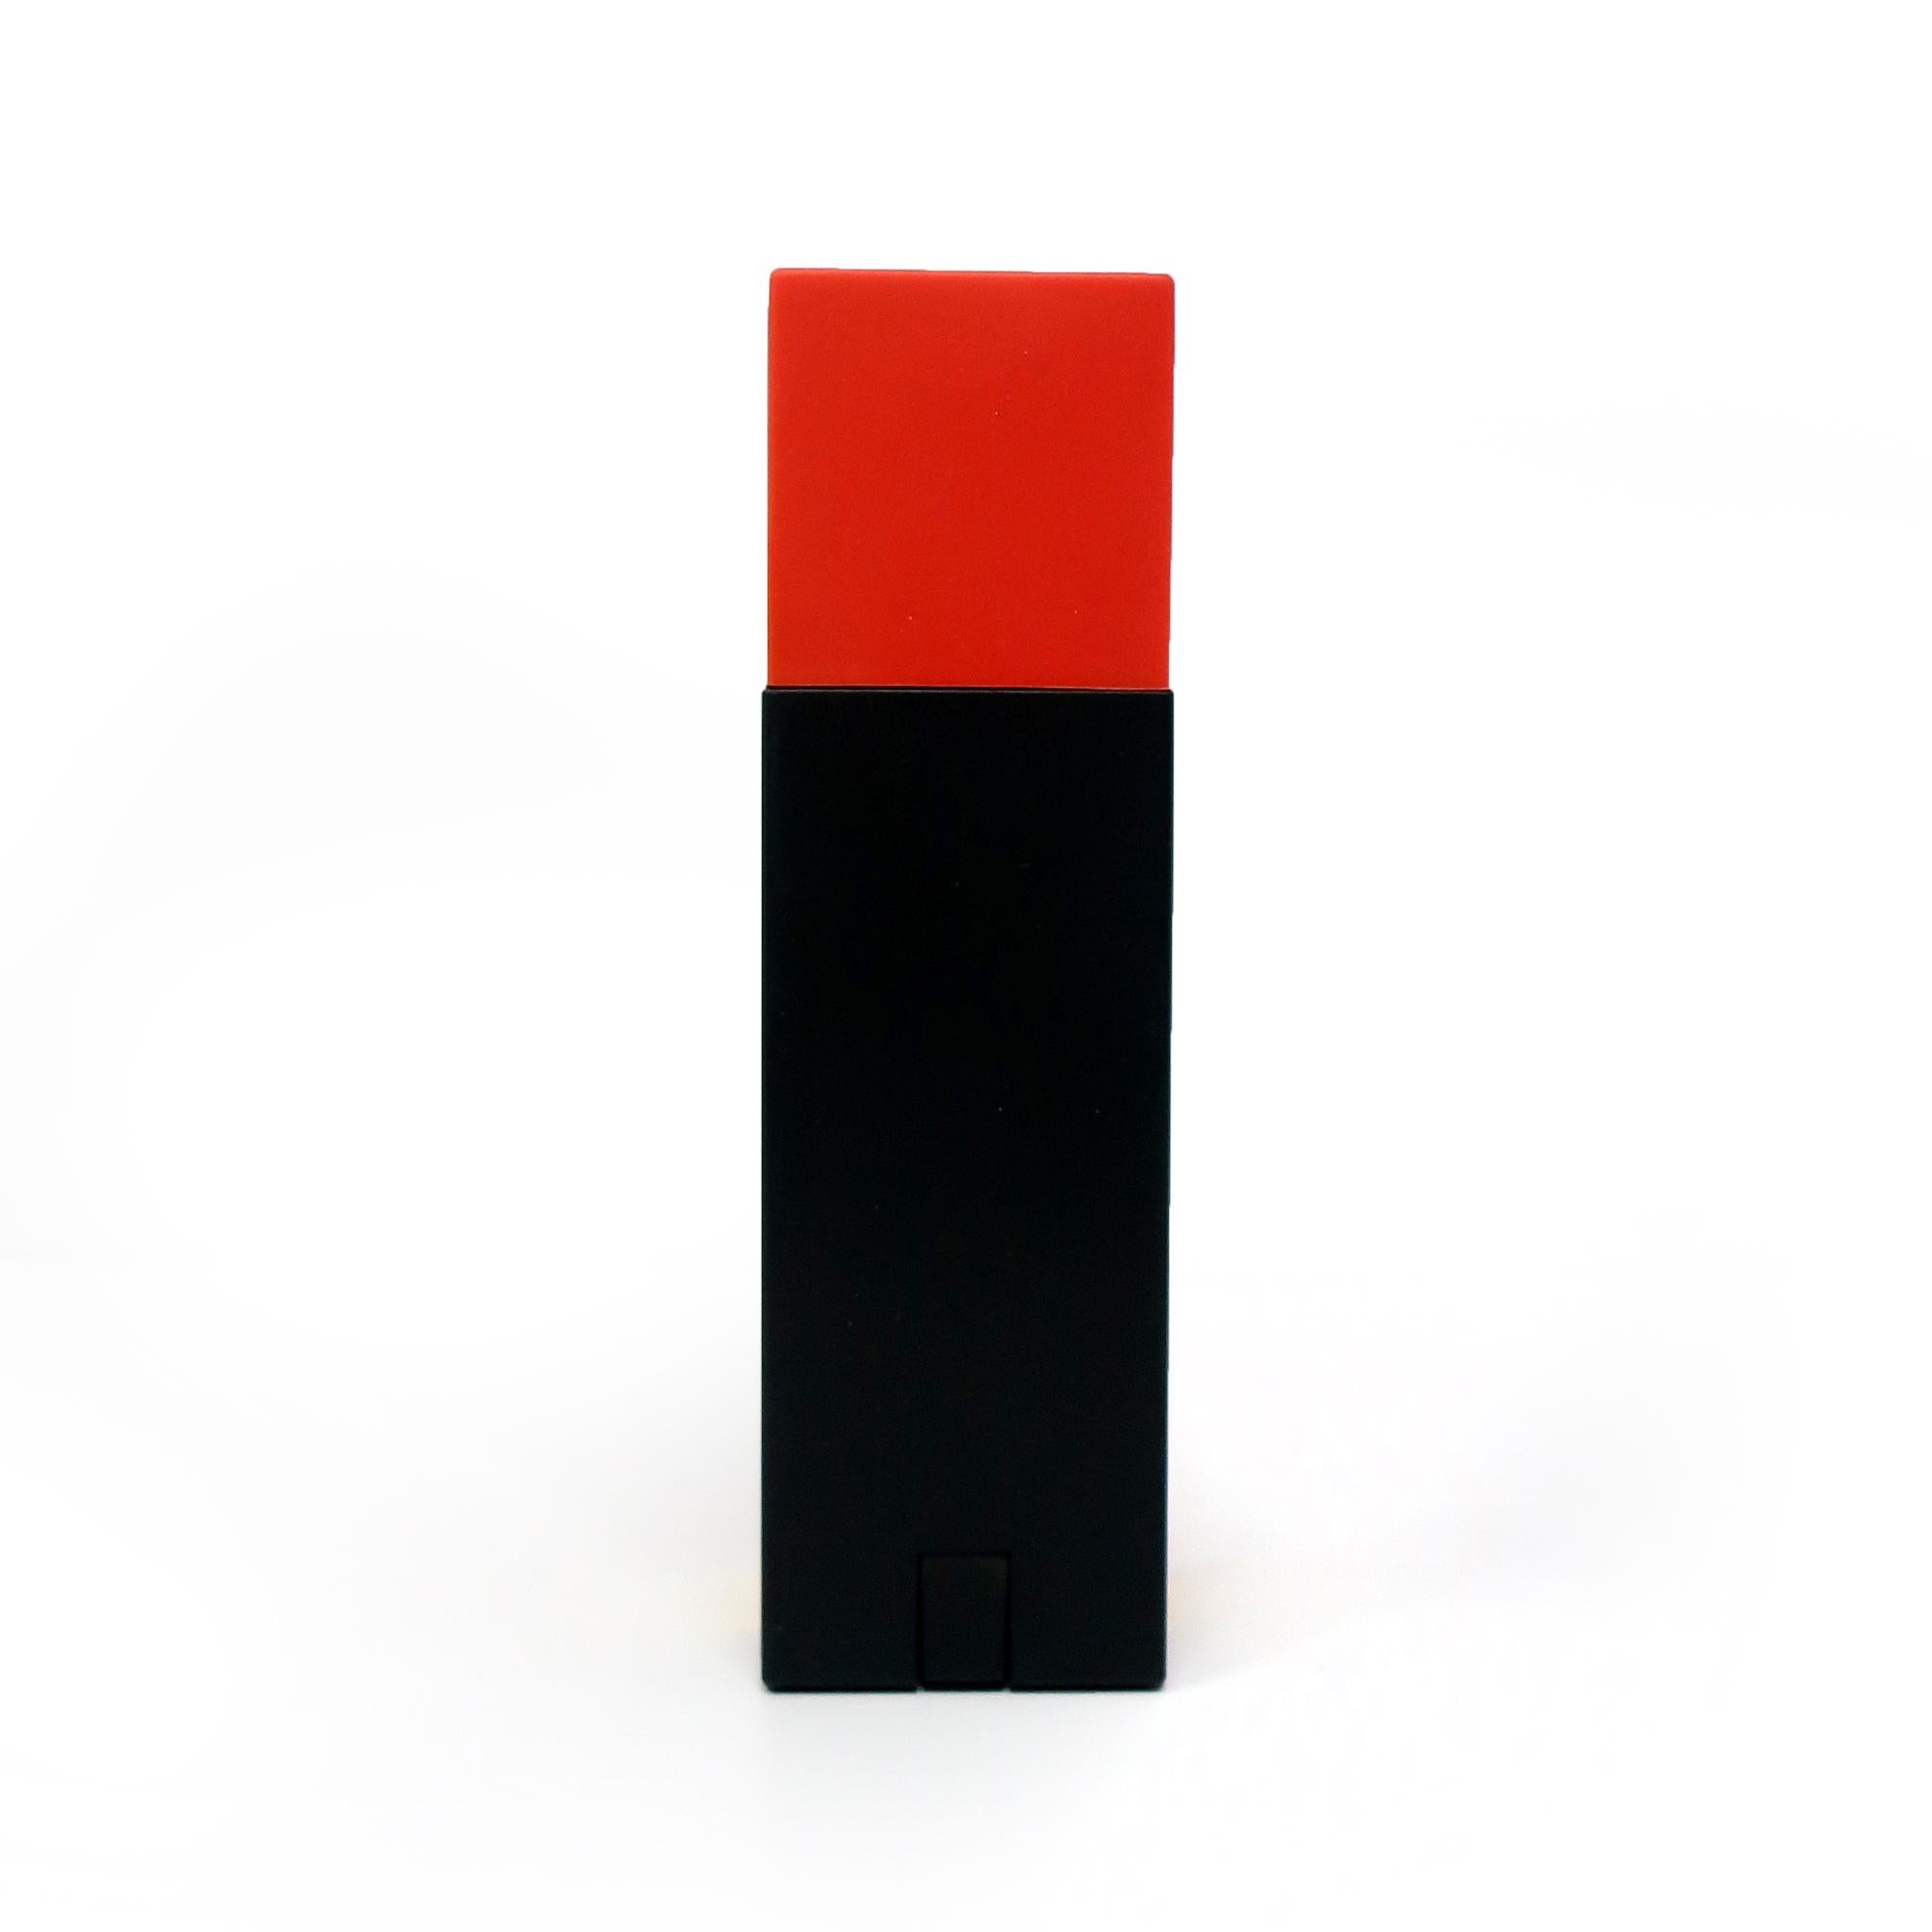 Post-Modern 1986 Enorme Telephone Handset by Ettore Sottsass For Sale